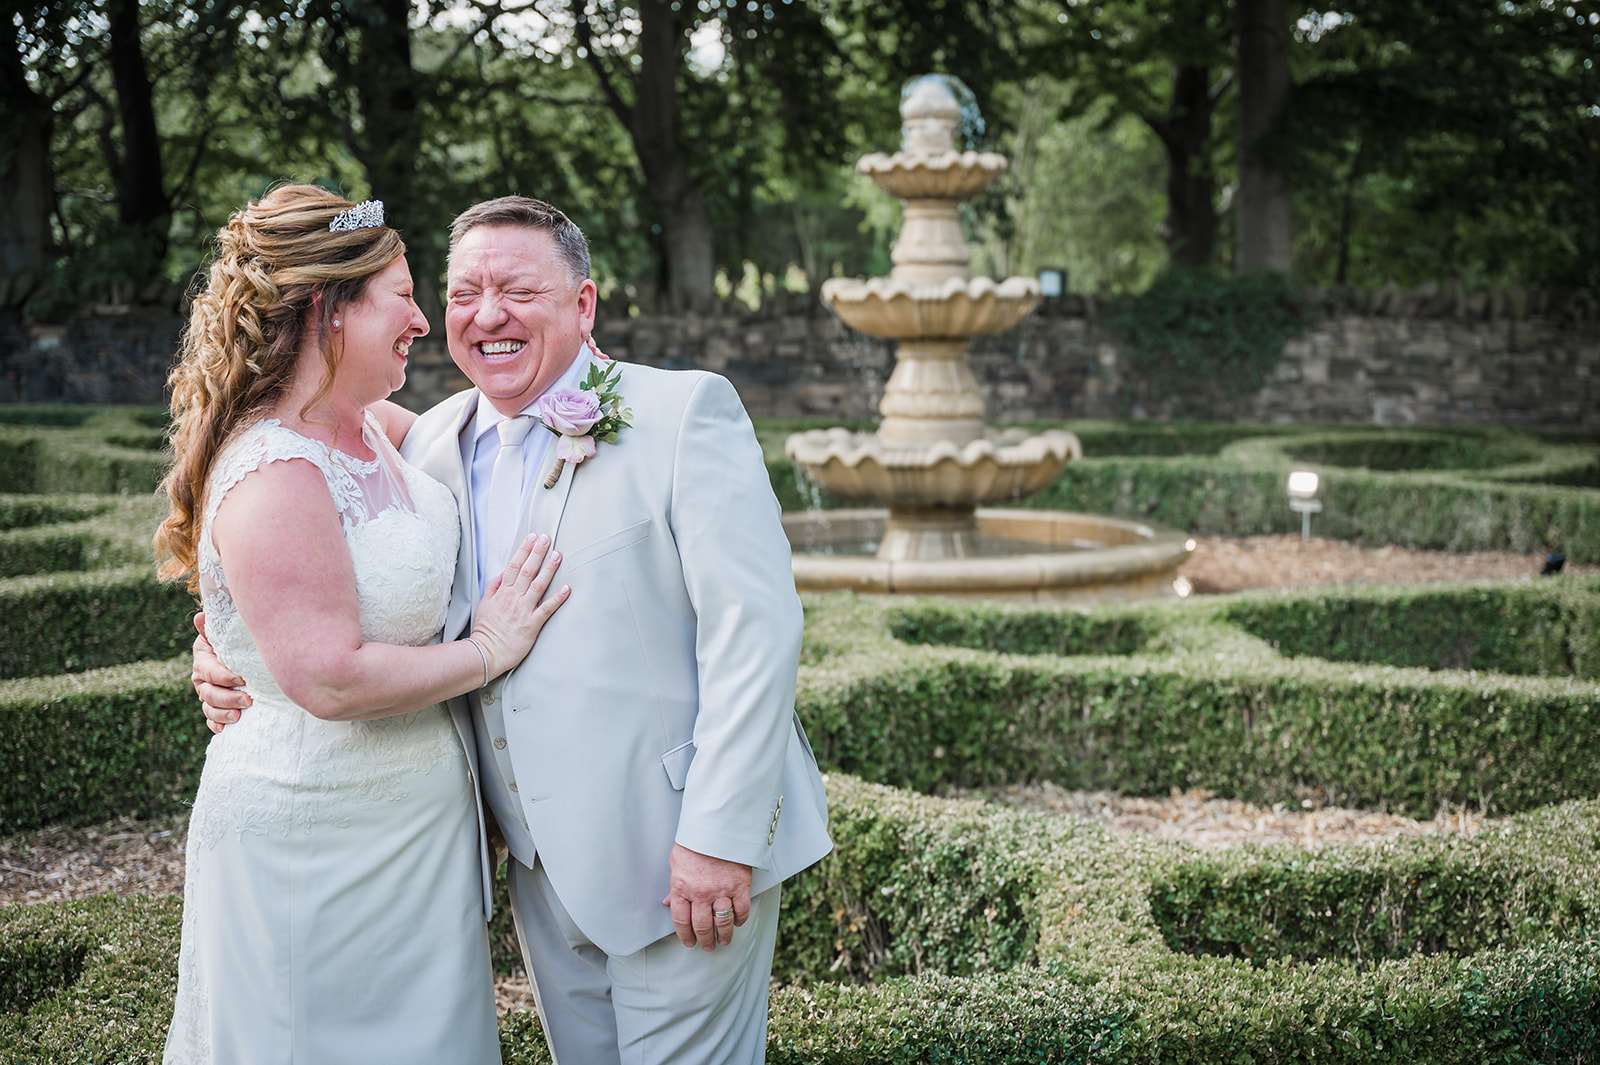 We can’t quite believe that it’s been just over a year since Vicky and Glen’s beautiful private home marquee wedding - what perfect timing to feature this summer celebration on the blog. Set in the grounds of their magnificent home, Vicky and Glen’s wedding was a true honouring of family, laughter and Northern charm.